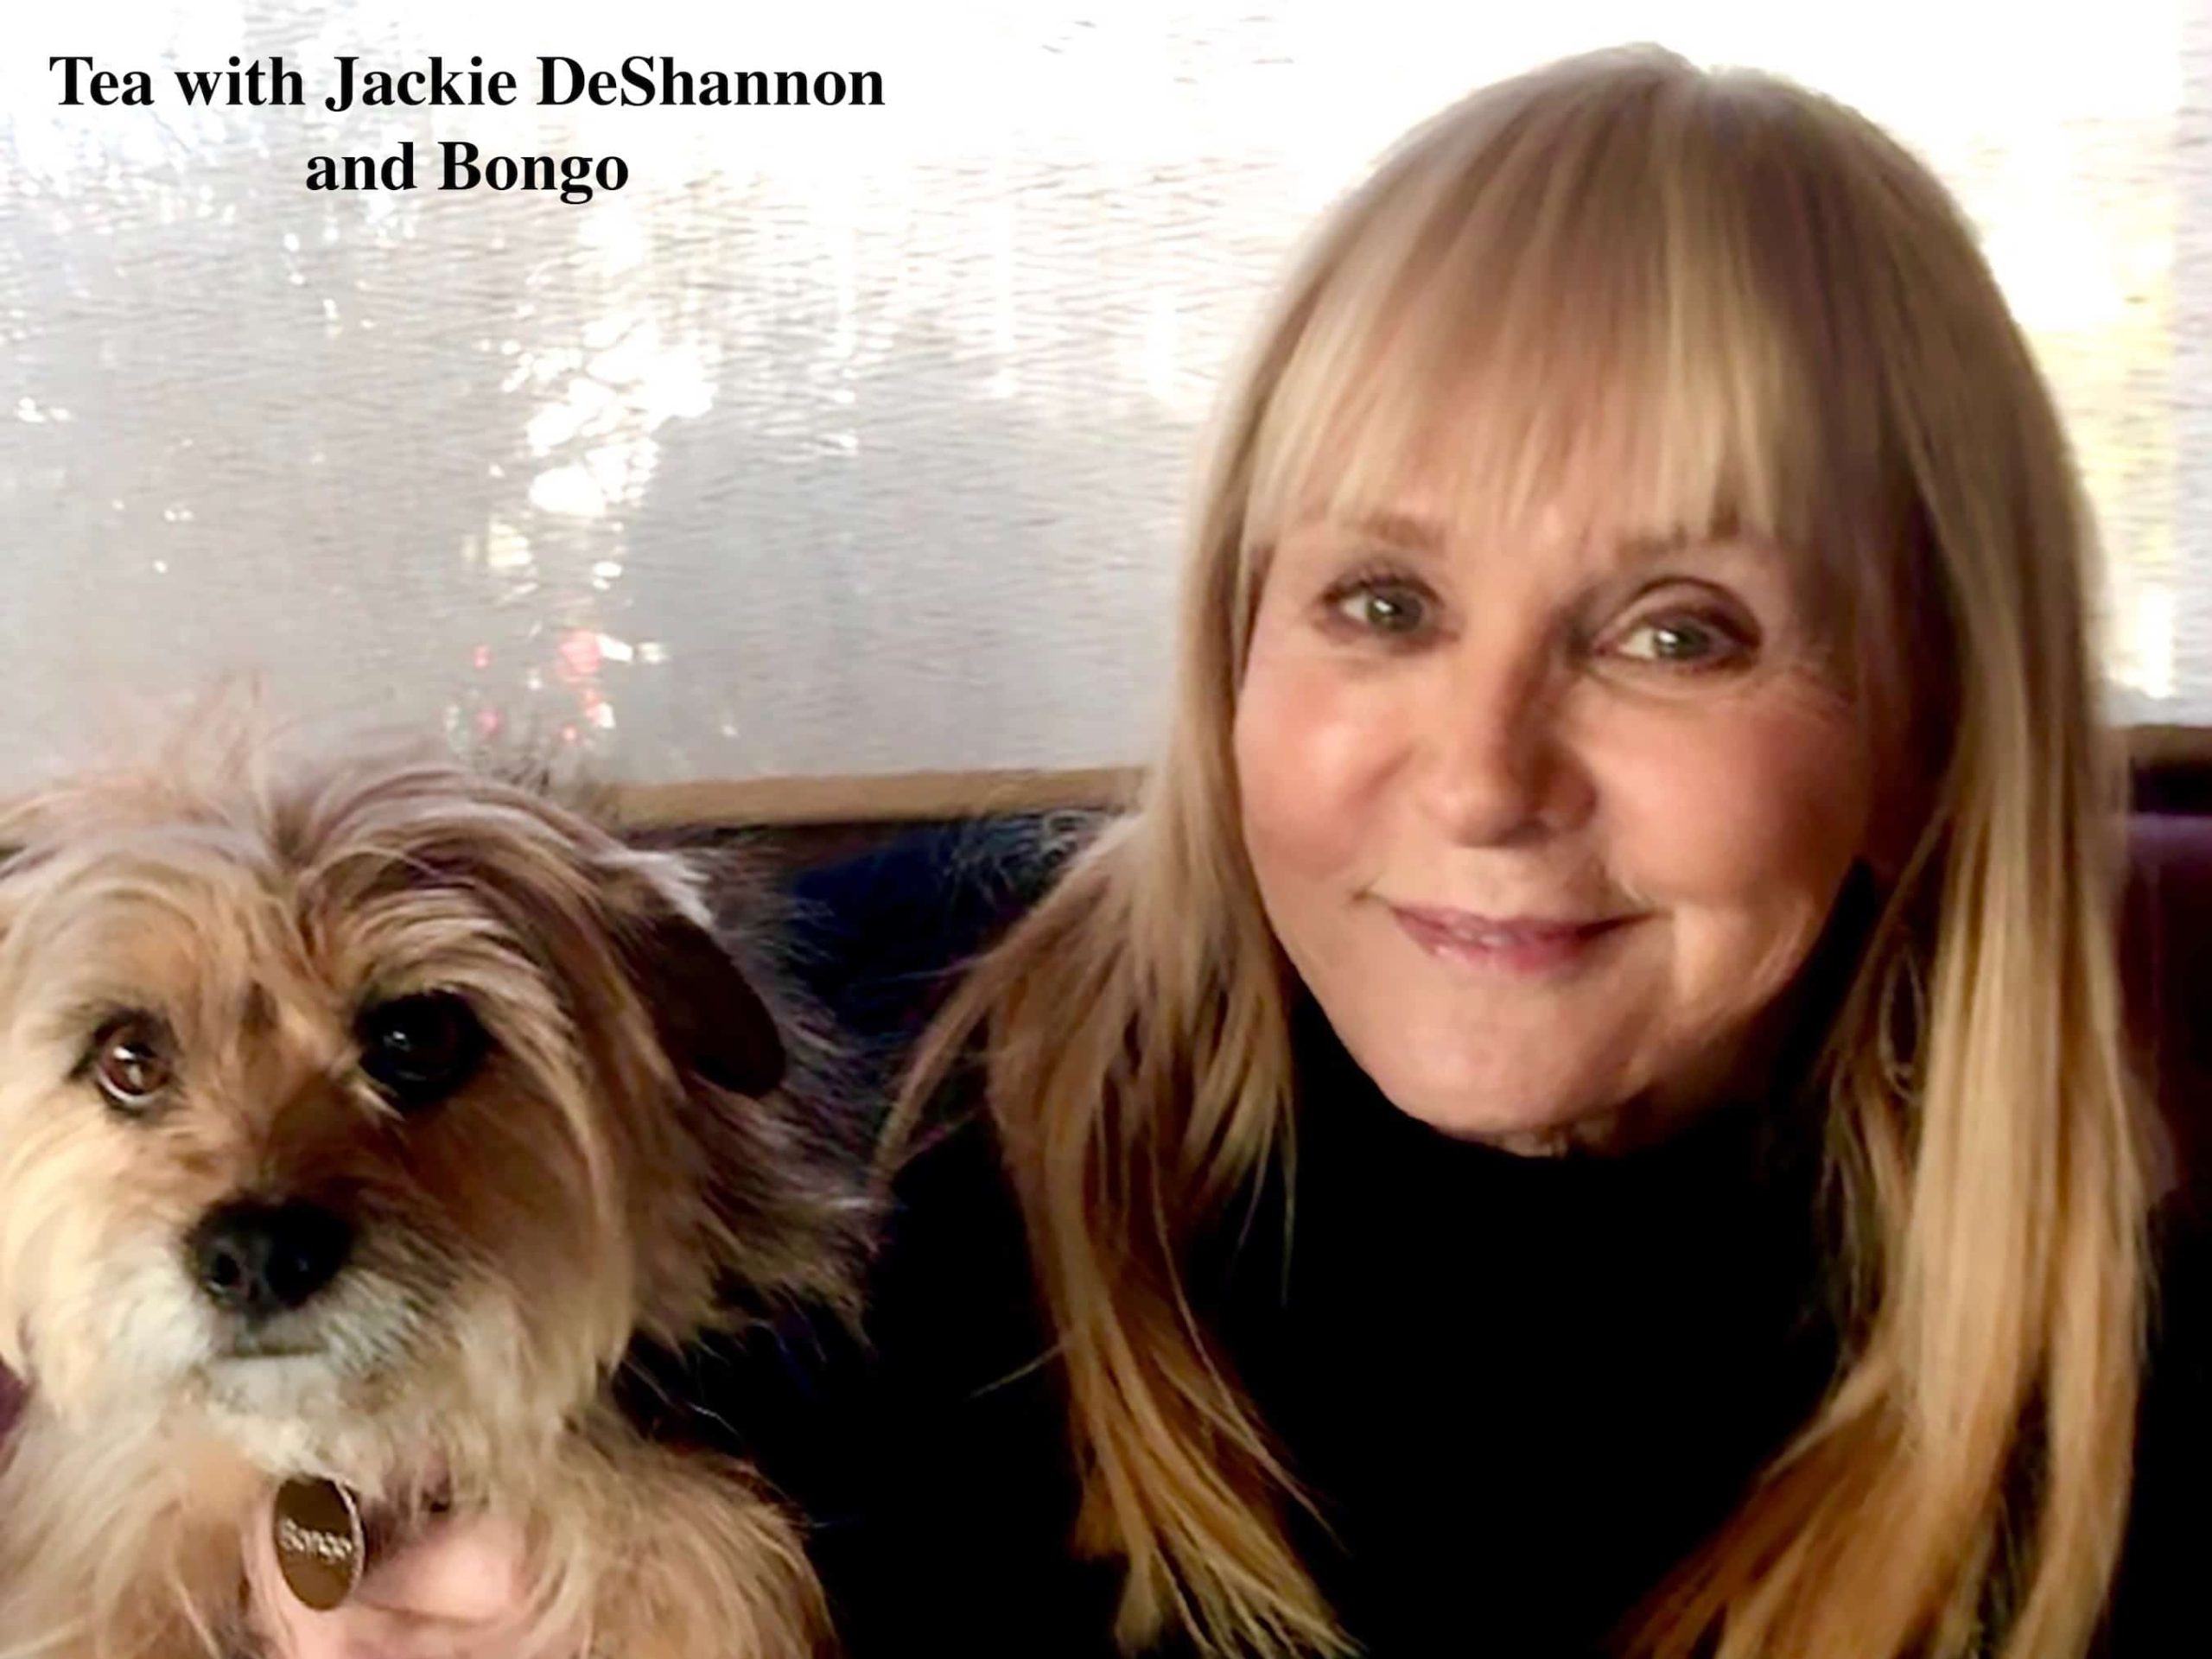 Share a cuppa tea with Jackie DeShannon - Beat Magazine